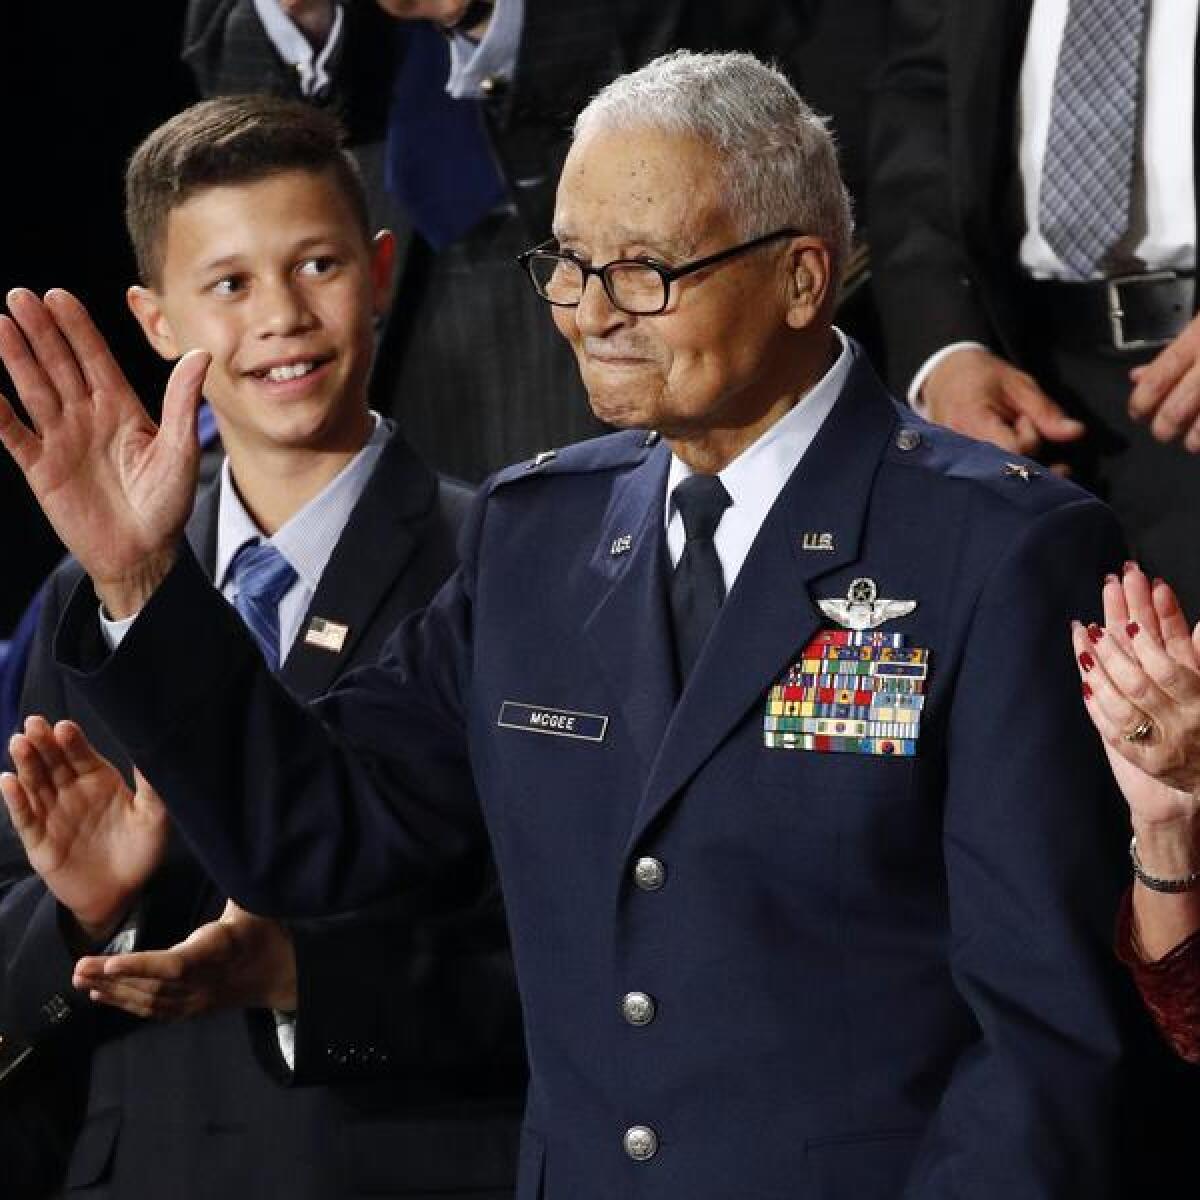 One of the last Tuskegee Airmen, Charles McGee, has died aged 102.